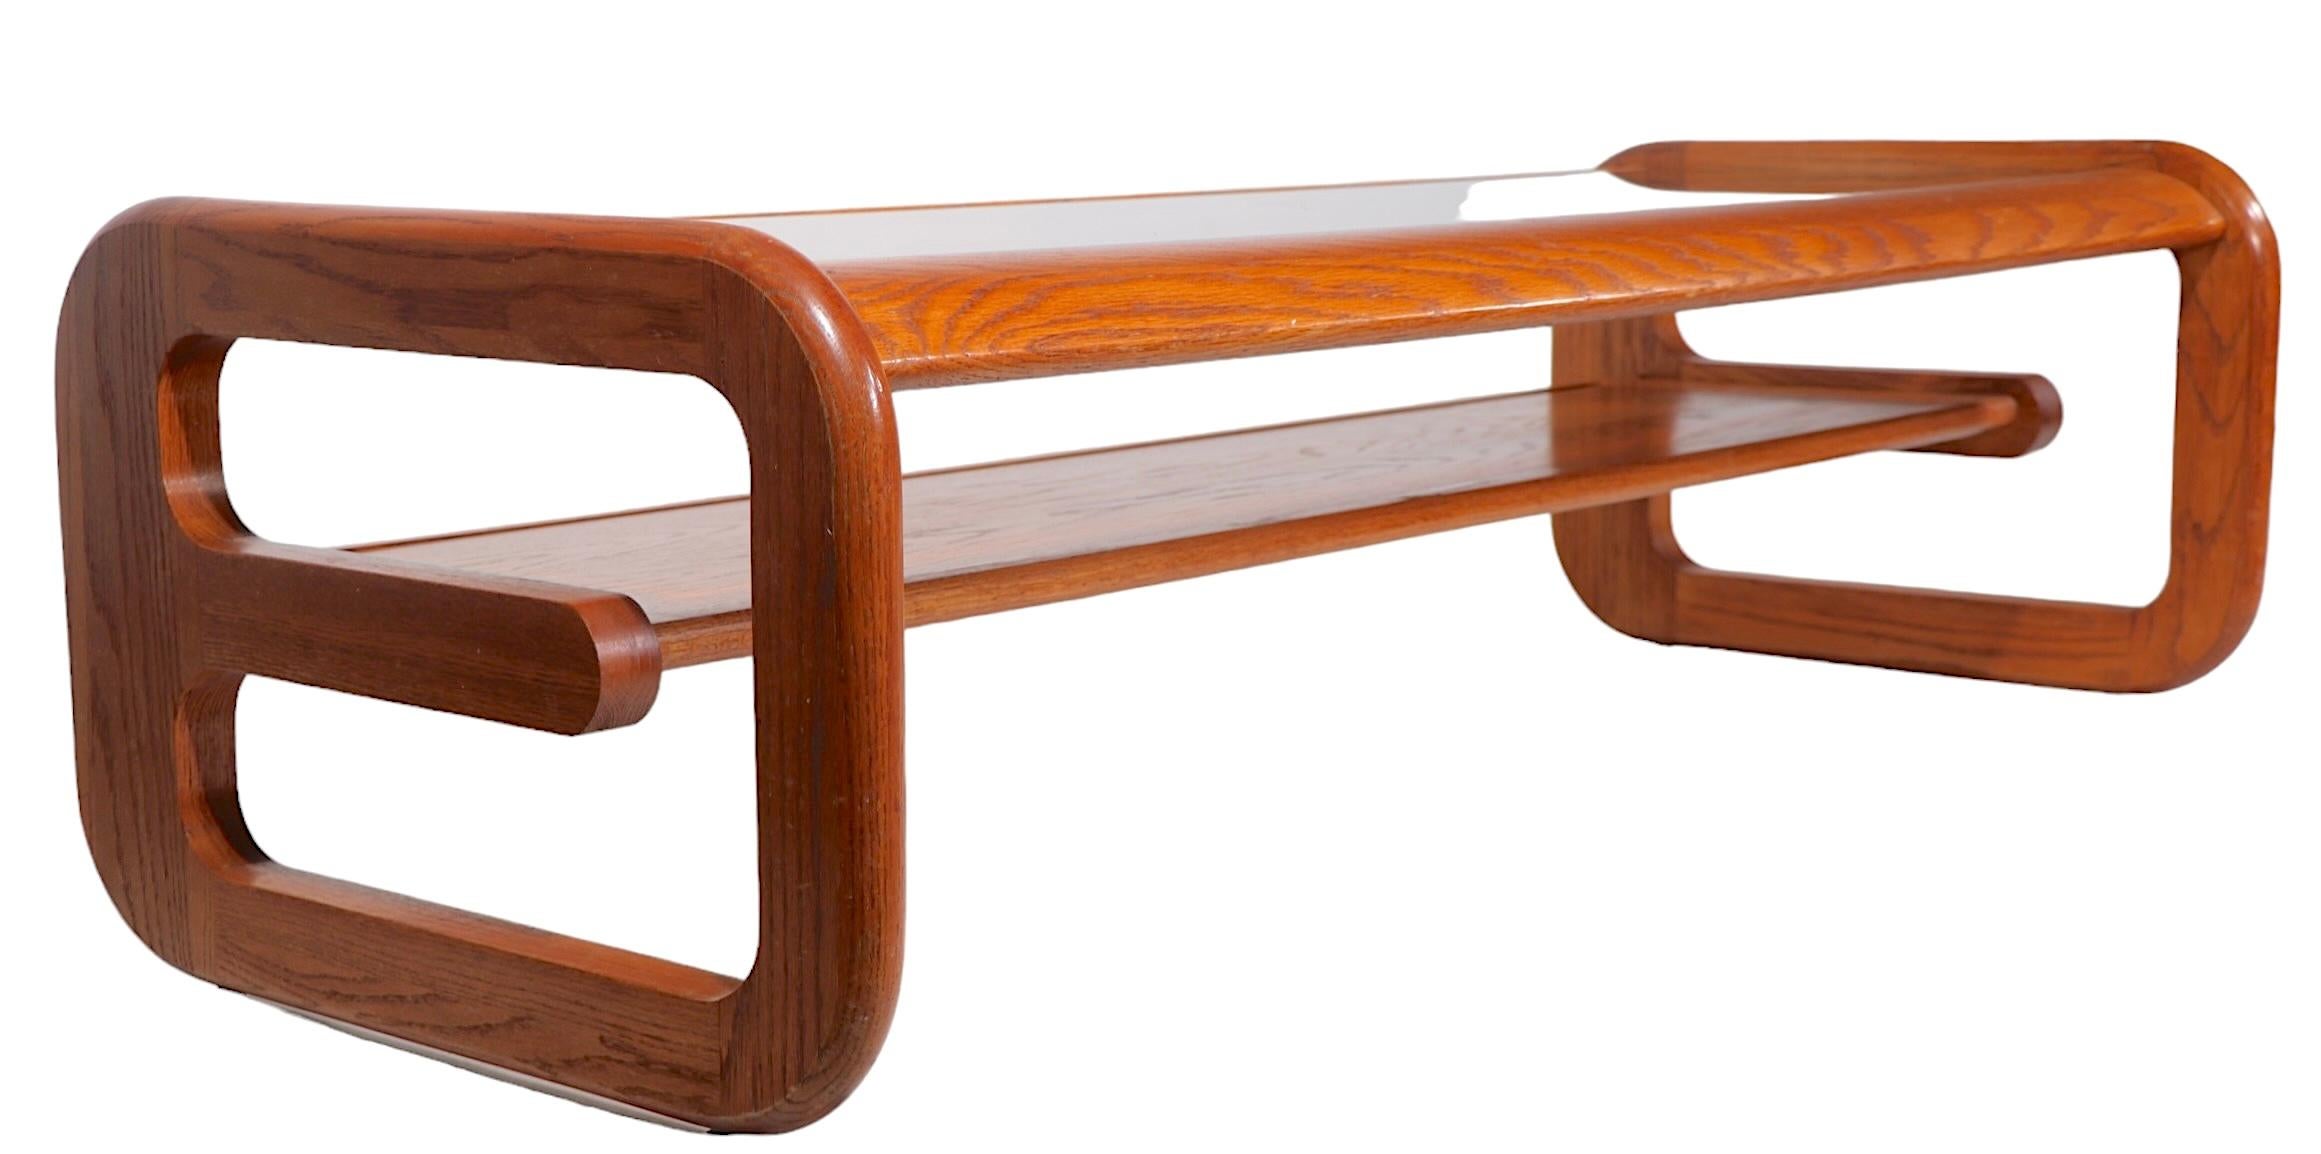  Post Modern Oak and Glass Coffee Table by Lou Hodges for Mersman  c. 1970's For Sale 2